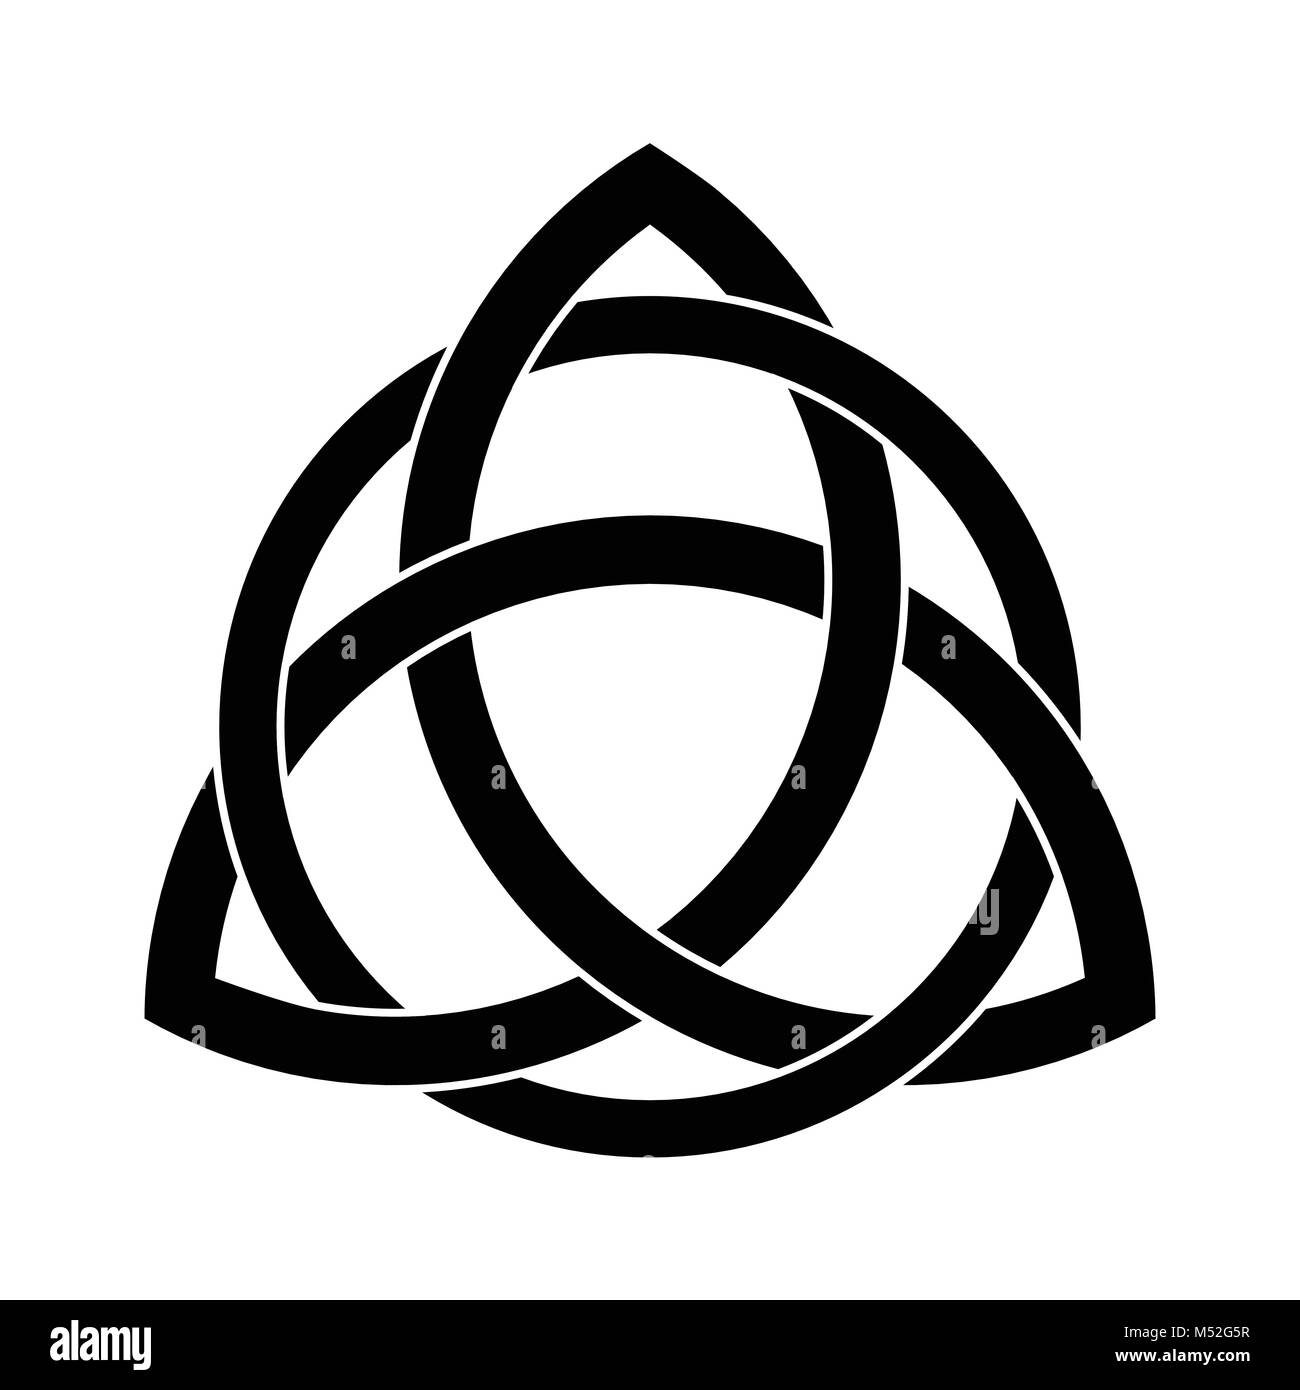 Black triquetra ornament with editable fill and stroke colors Stock Vector